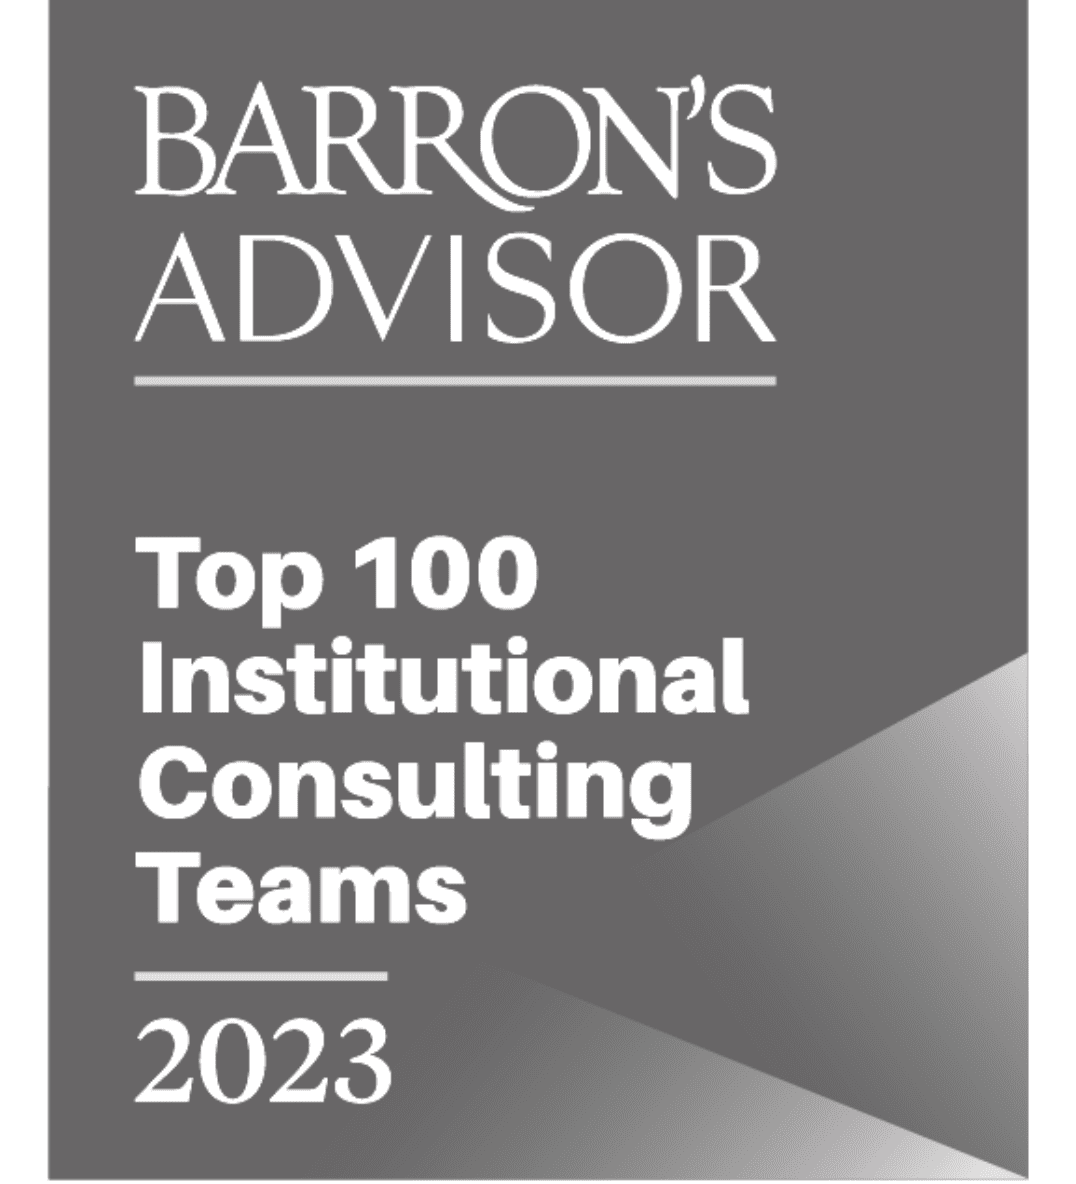 Barron's Advisor Top 100 Institutional Consulting teams